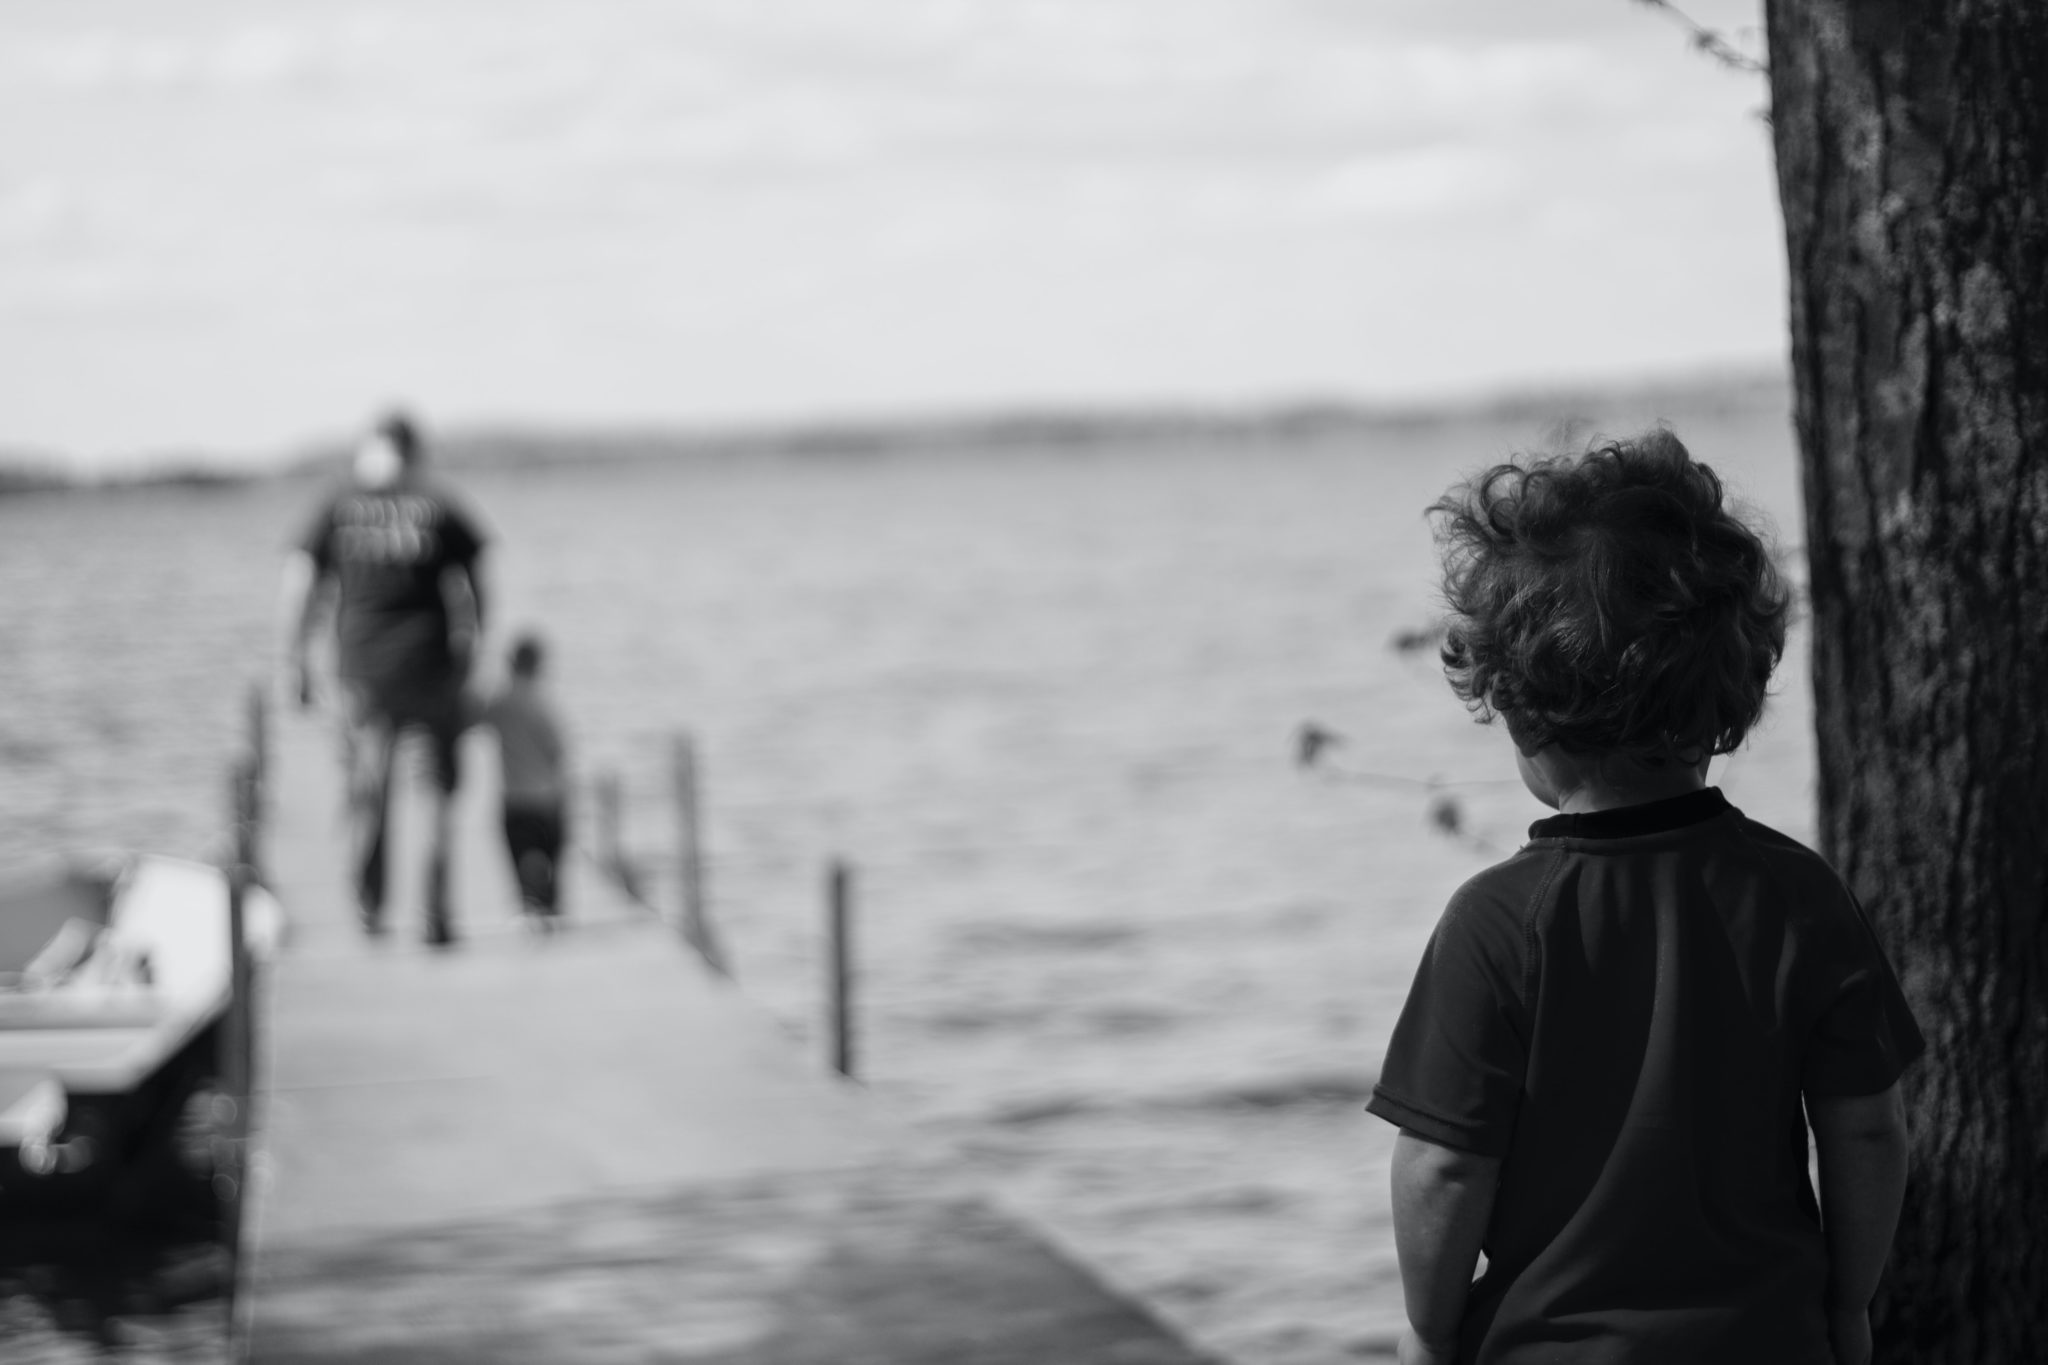 Grayscale image of a boy from a distance watching a man another boy walking on a pier.